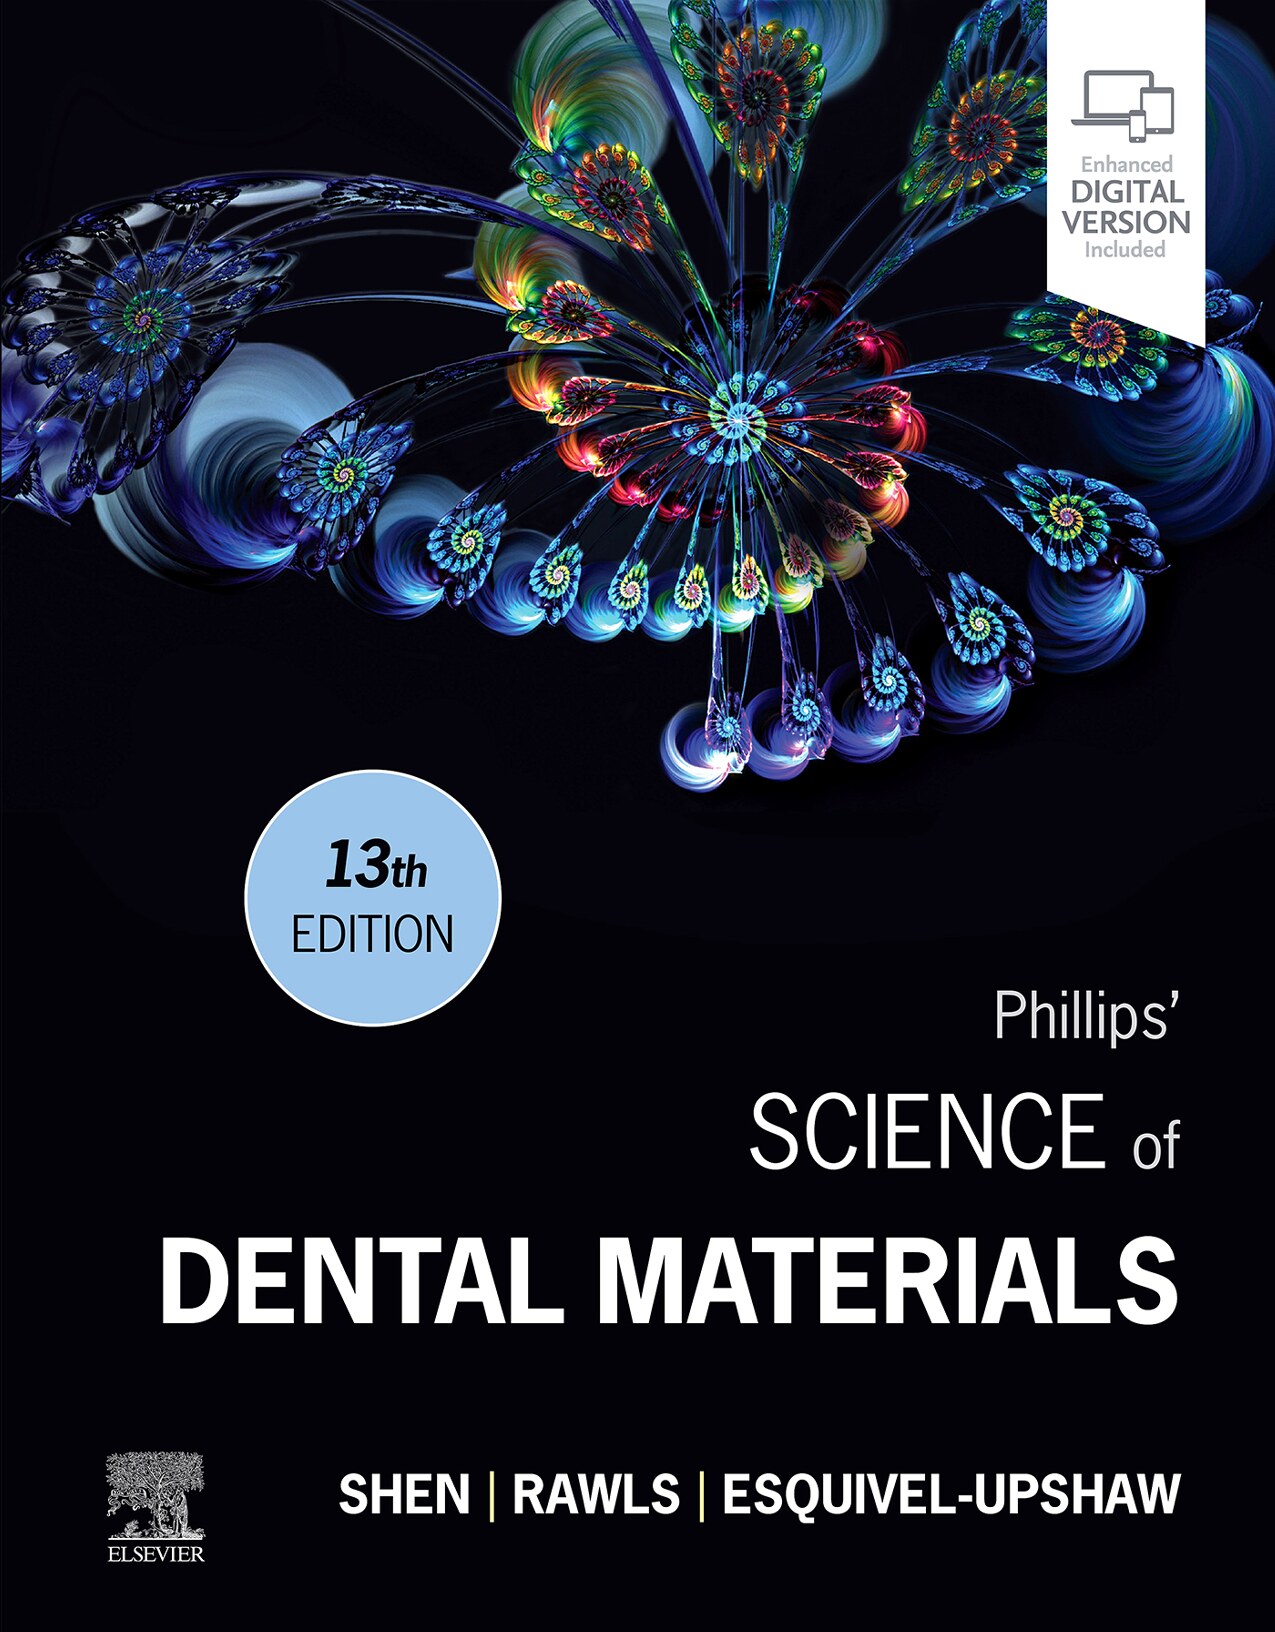 Phillips' Science of Dental Materials - Chiayi Shen, H. Ralph Rawls, Josephine F. Esquivel-Upshaw - 13th Edition (2021) 448 pp., ISBN: 9780323697552